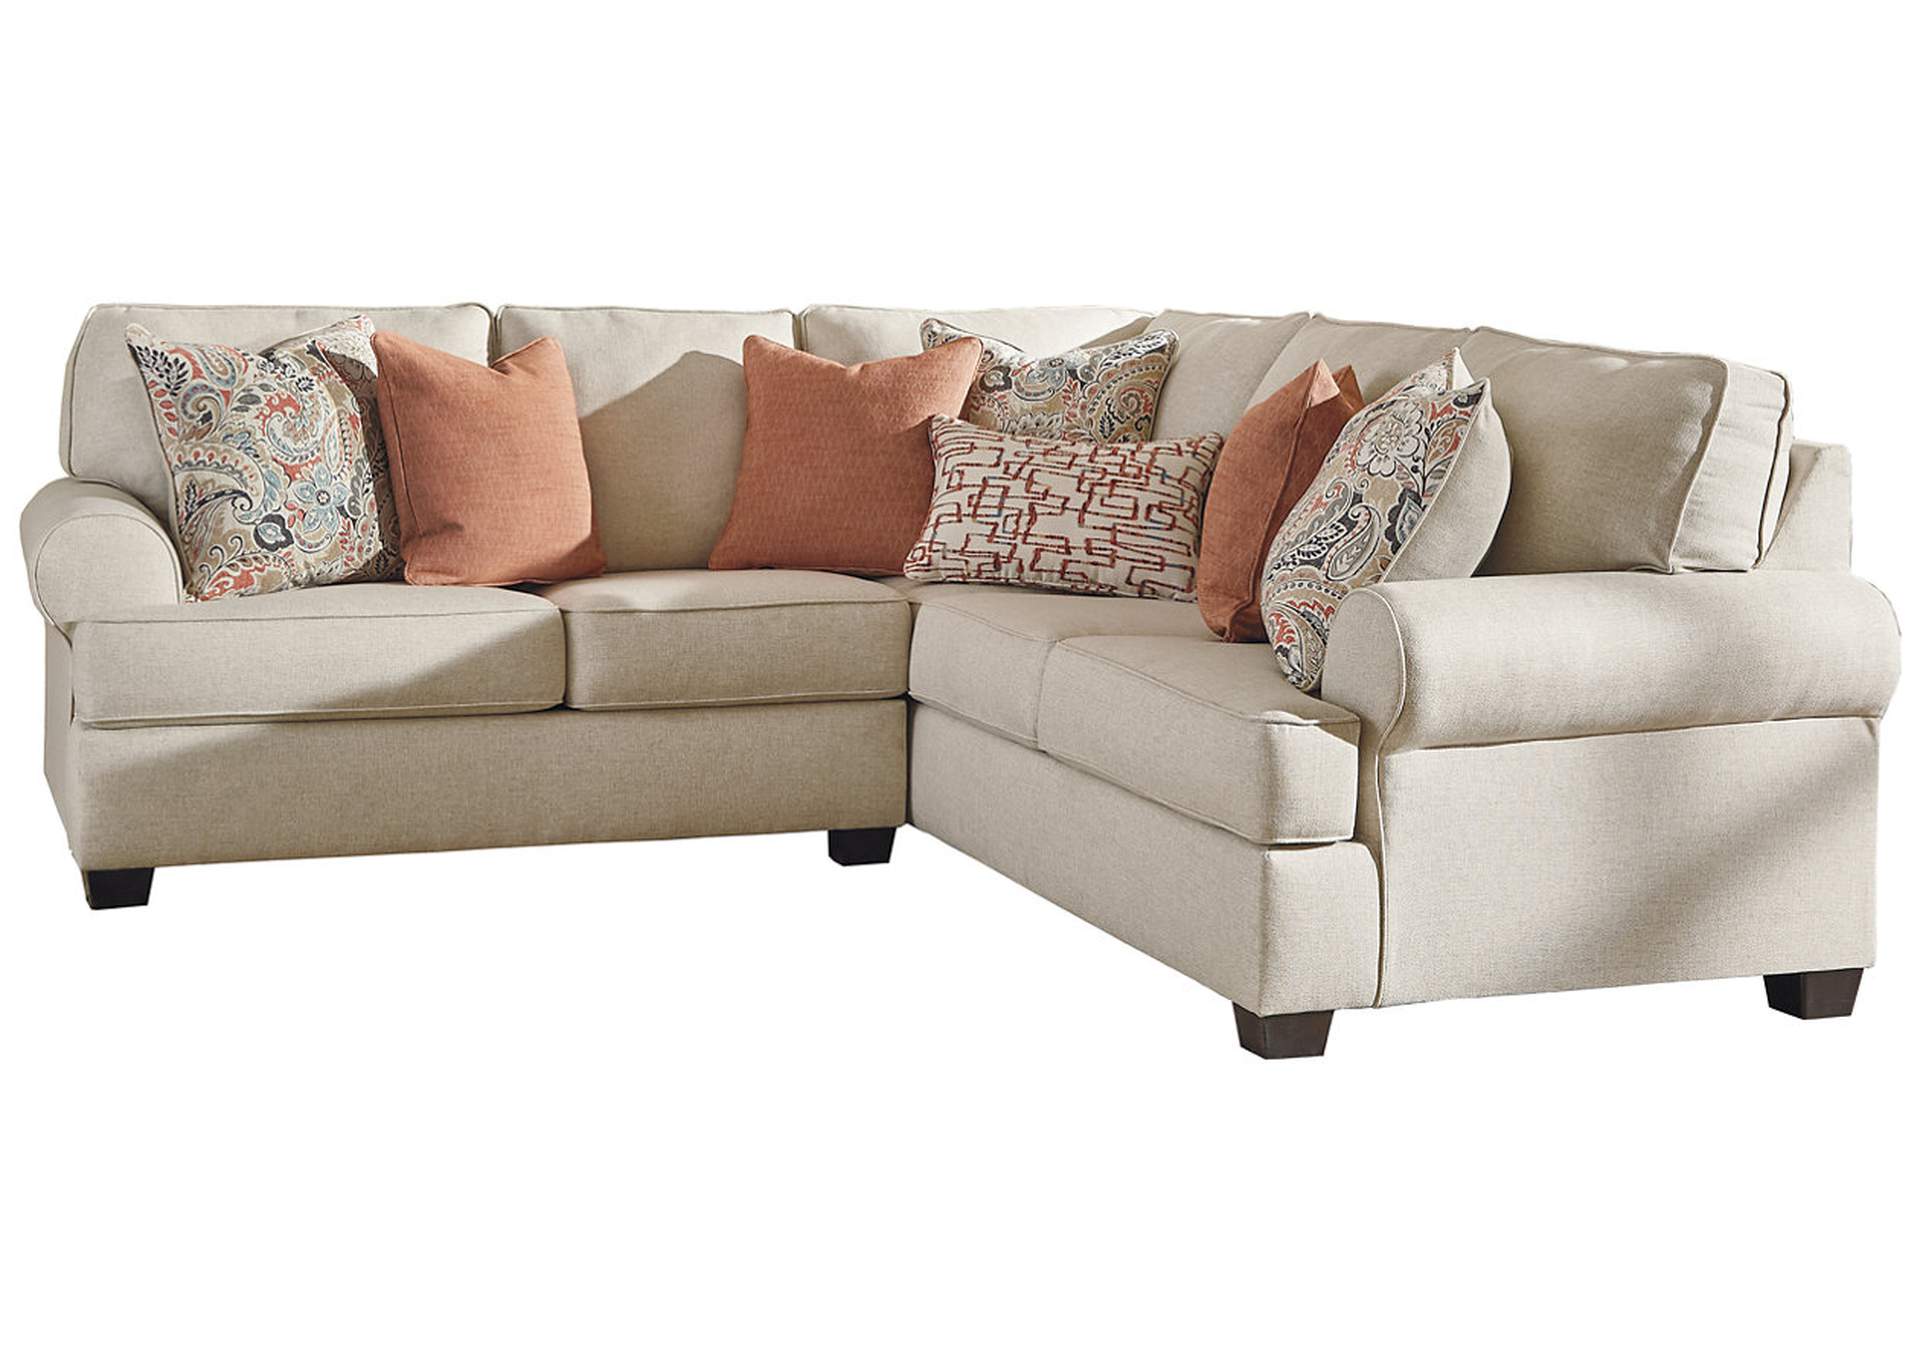 Amici 2-Piece Sectional,Signature Design By Ashley